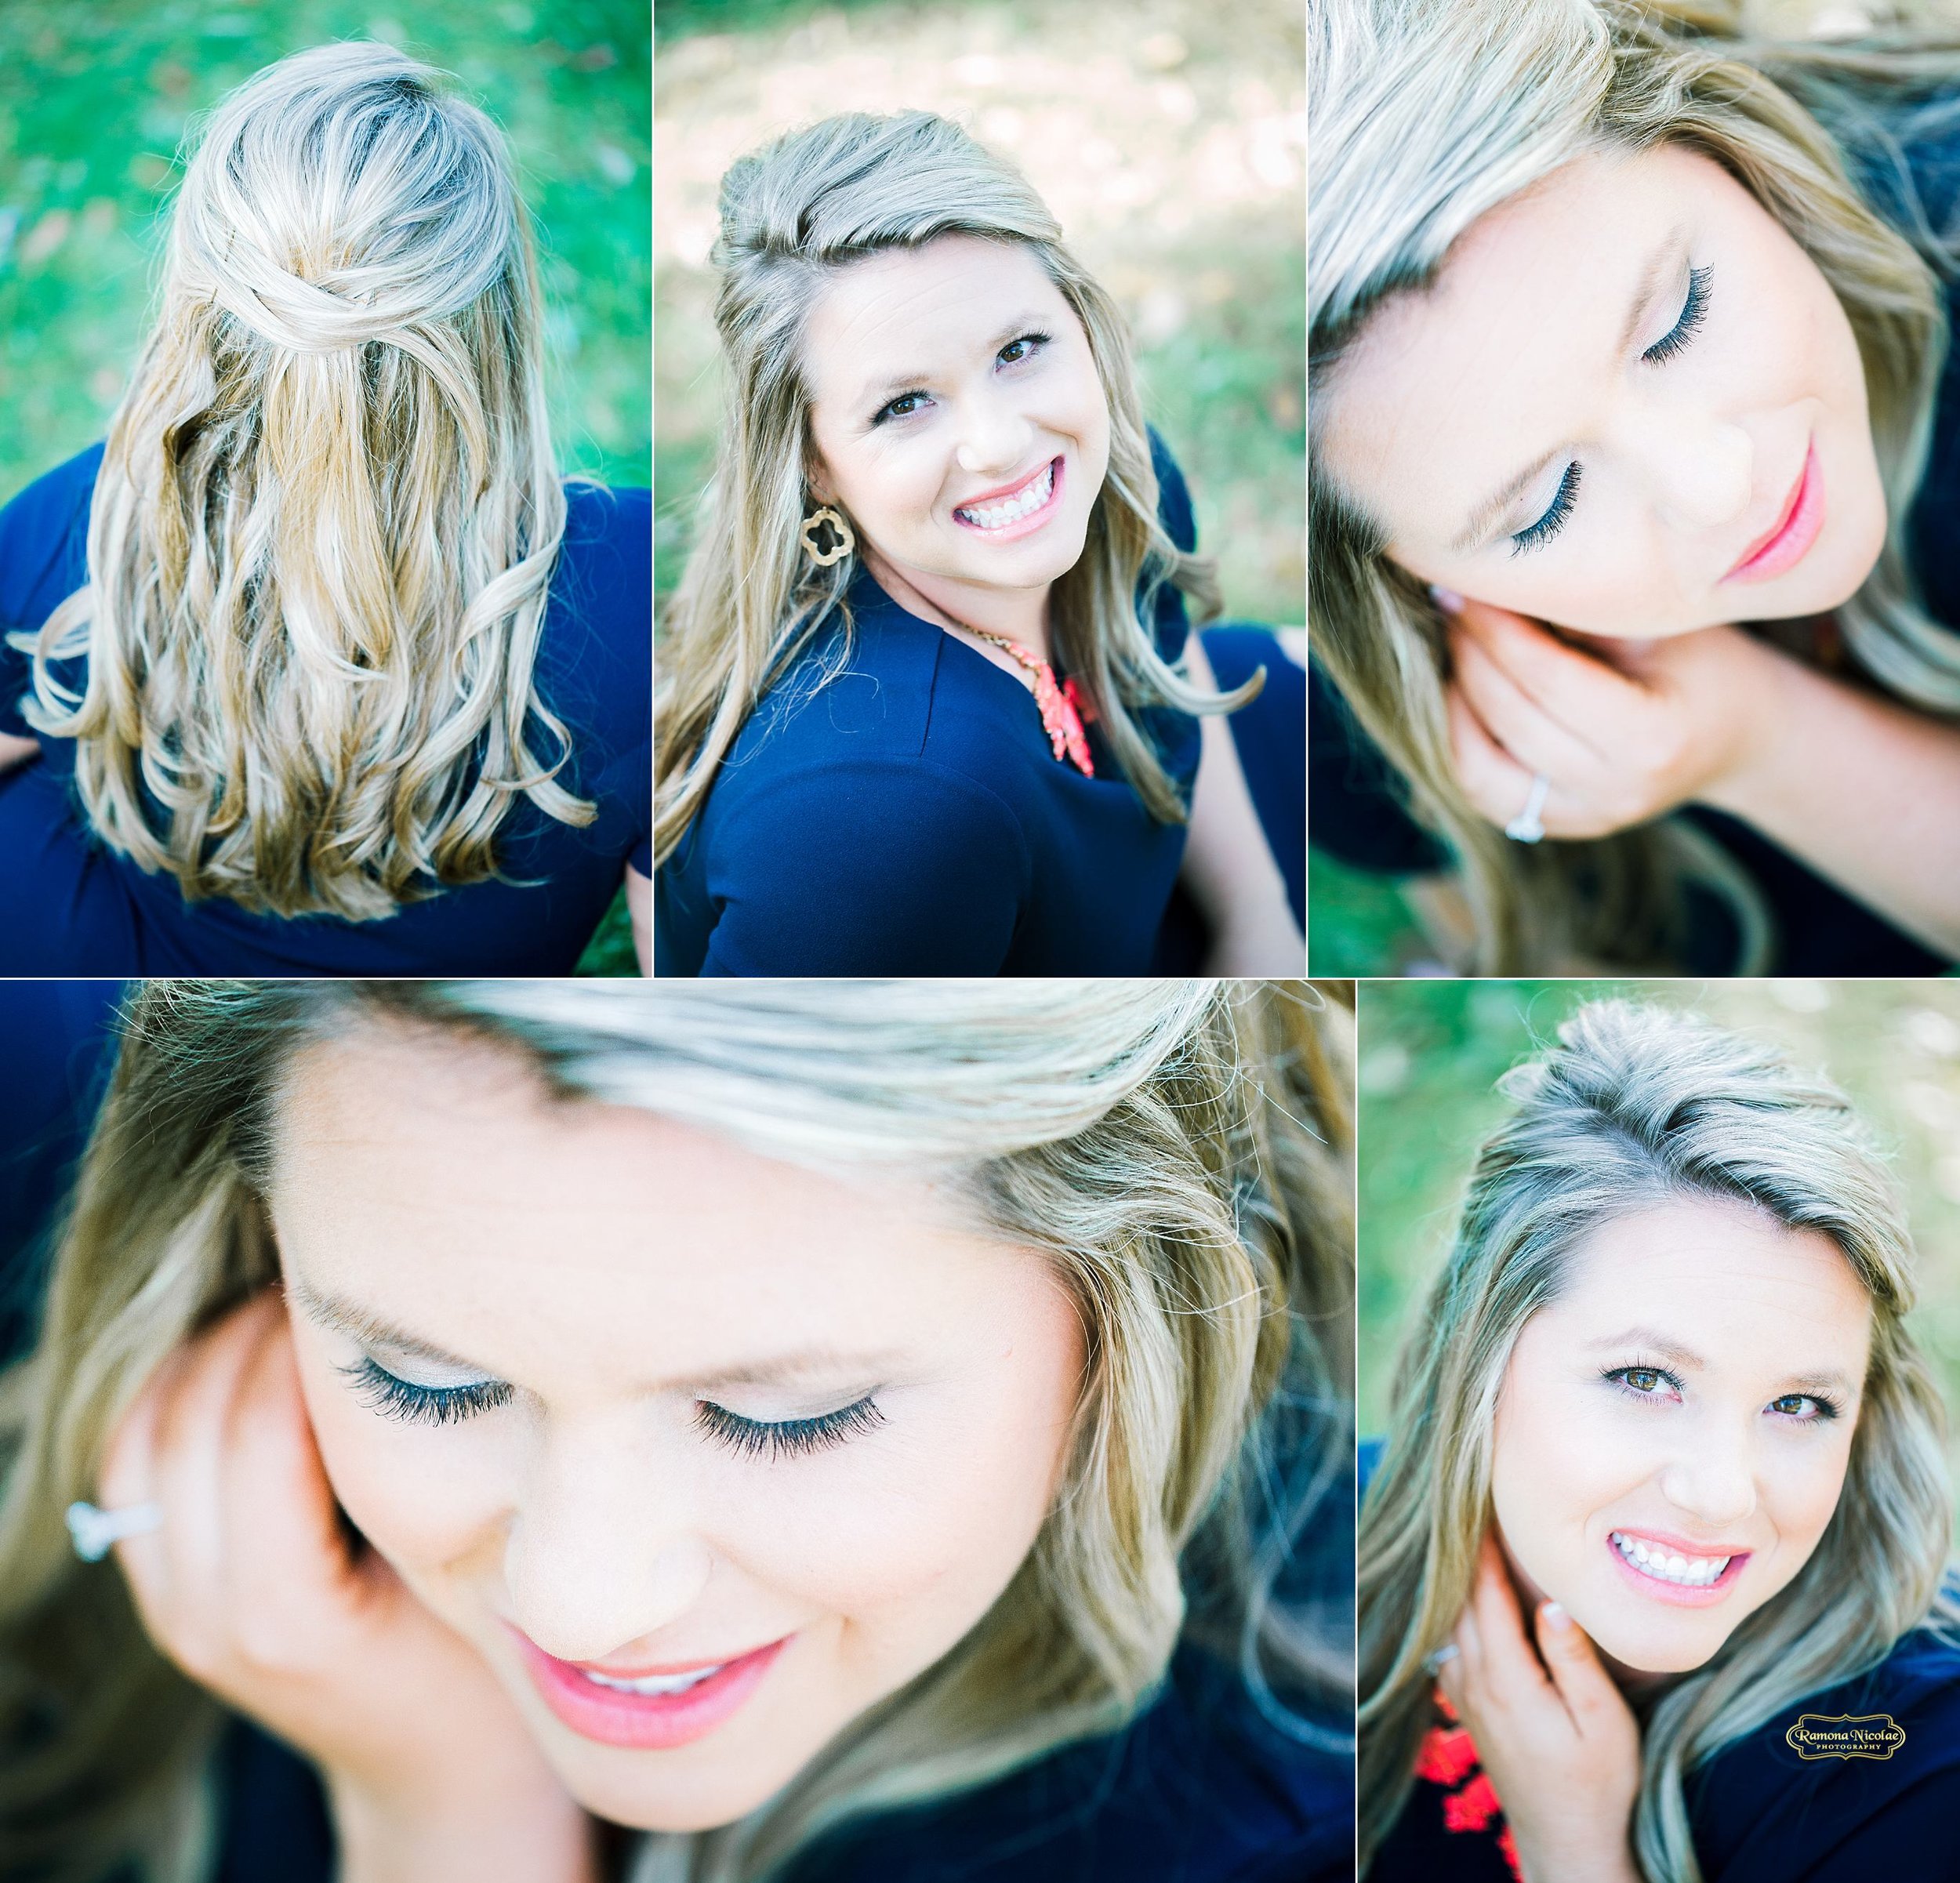 make up and hair details during engagement session at wachesaw plantation of beautiful blonge lady smiling with ramona nicolae photography.jpg